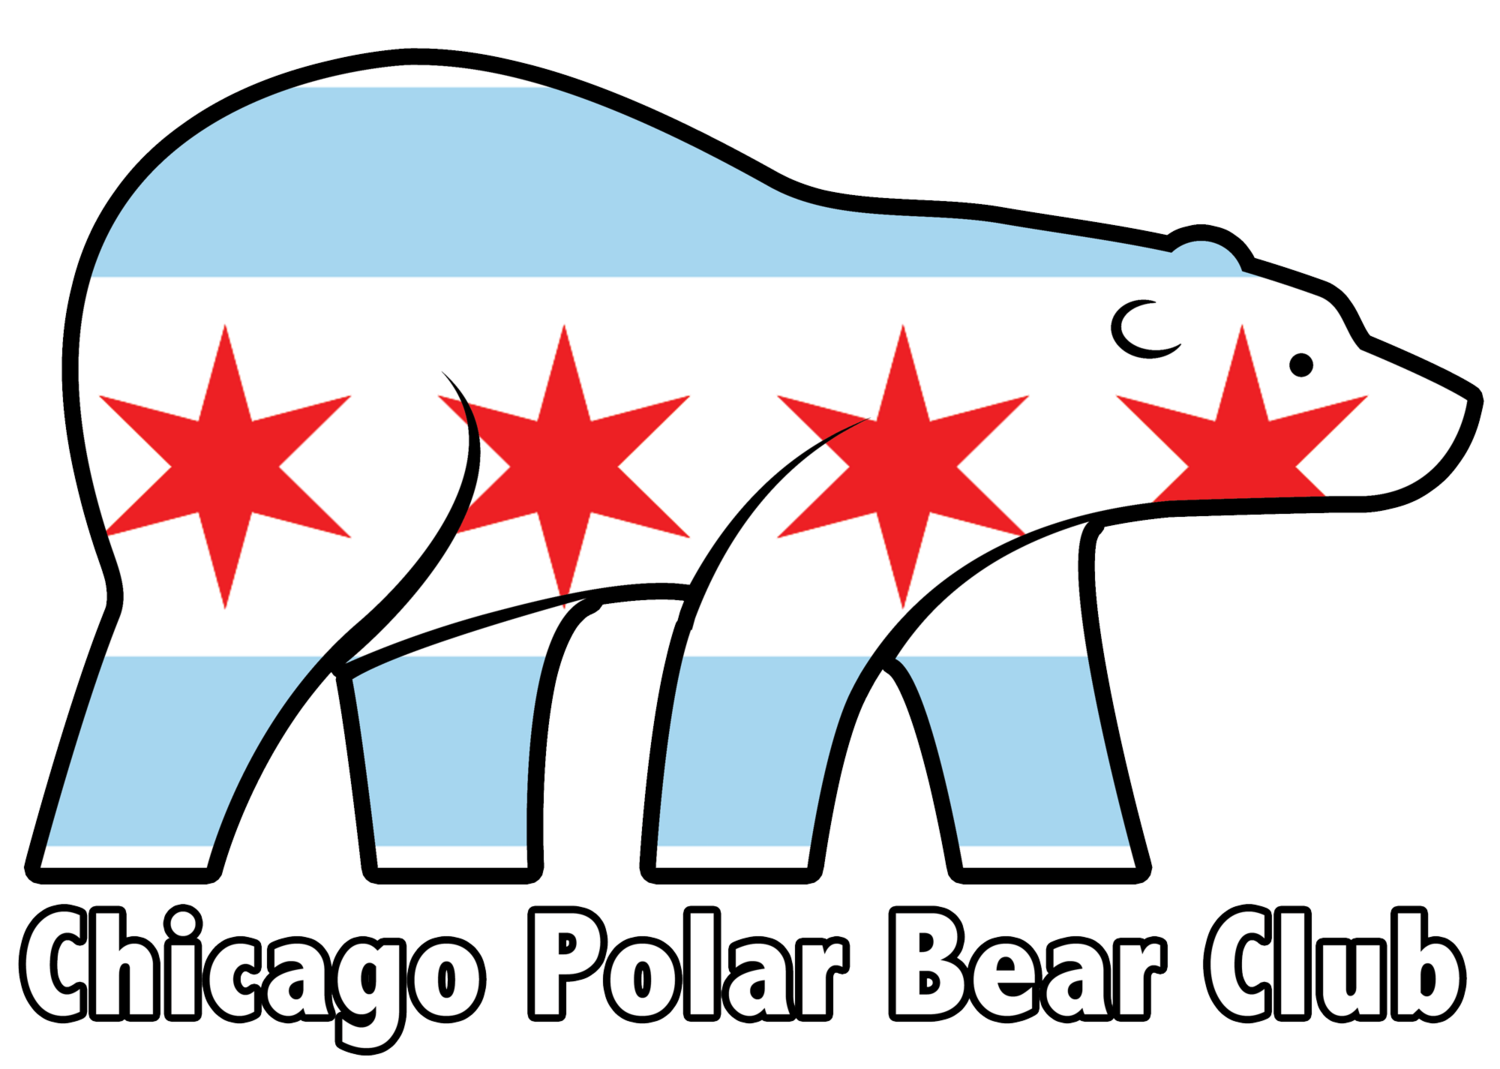 Cold clipart polar bear. Who we are chicago